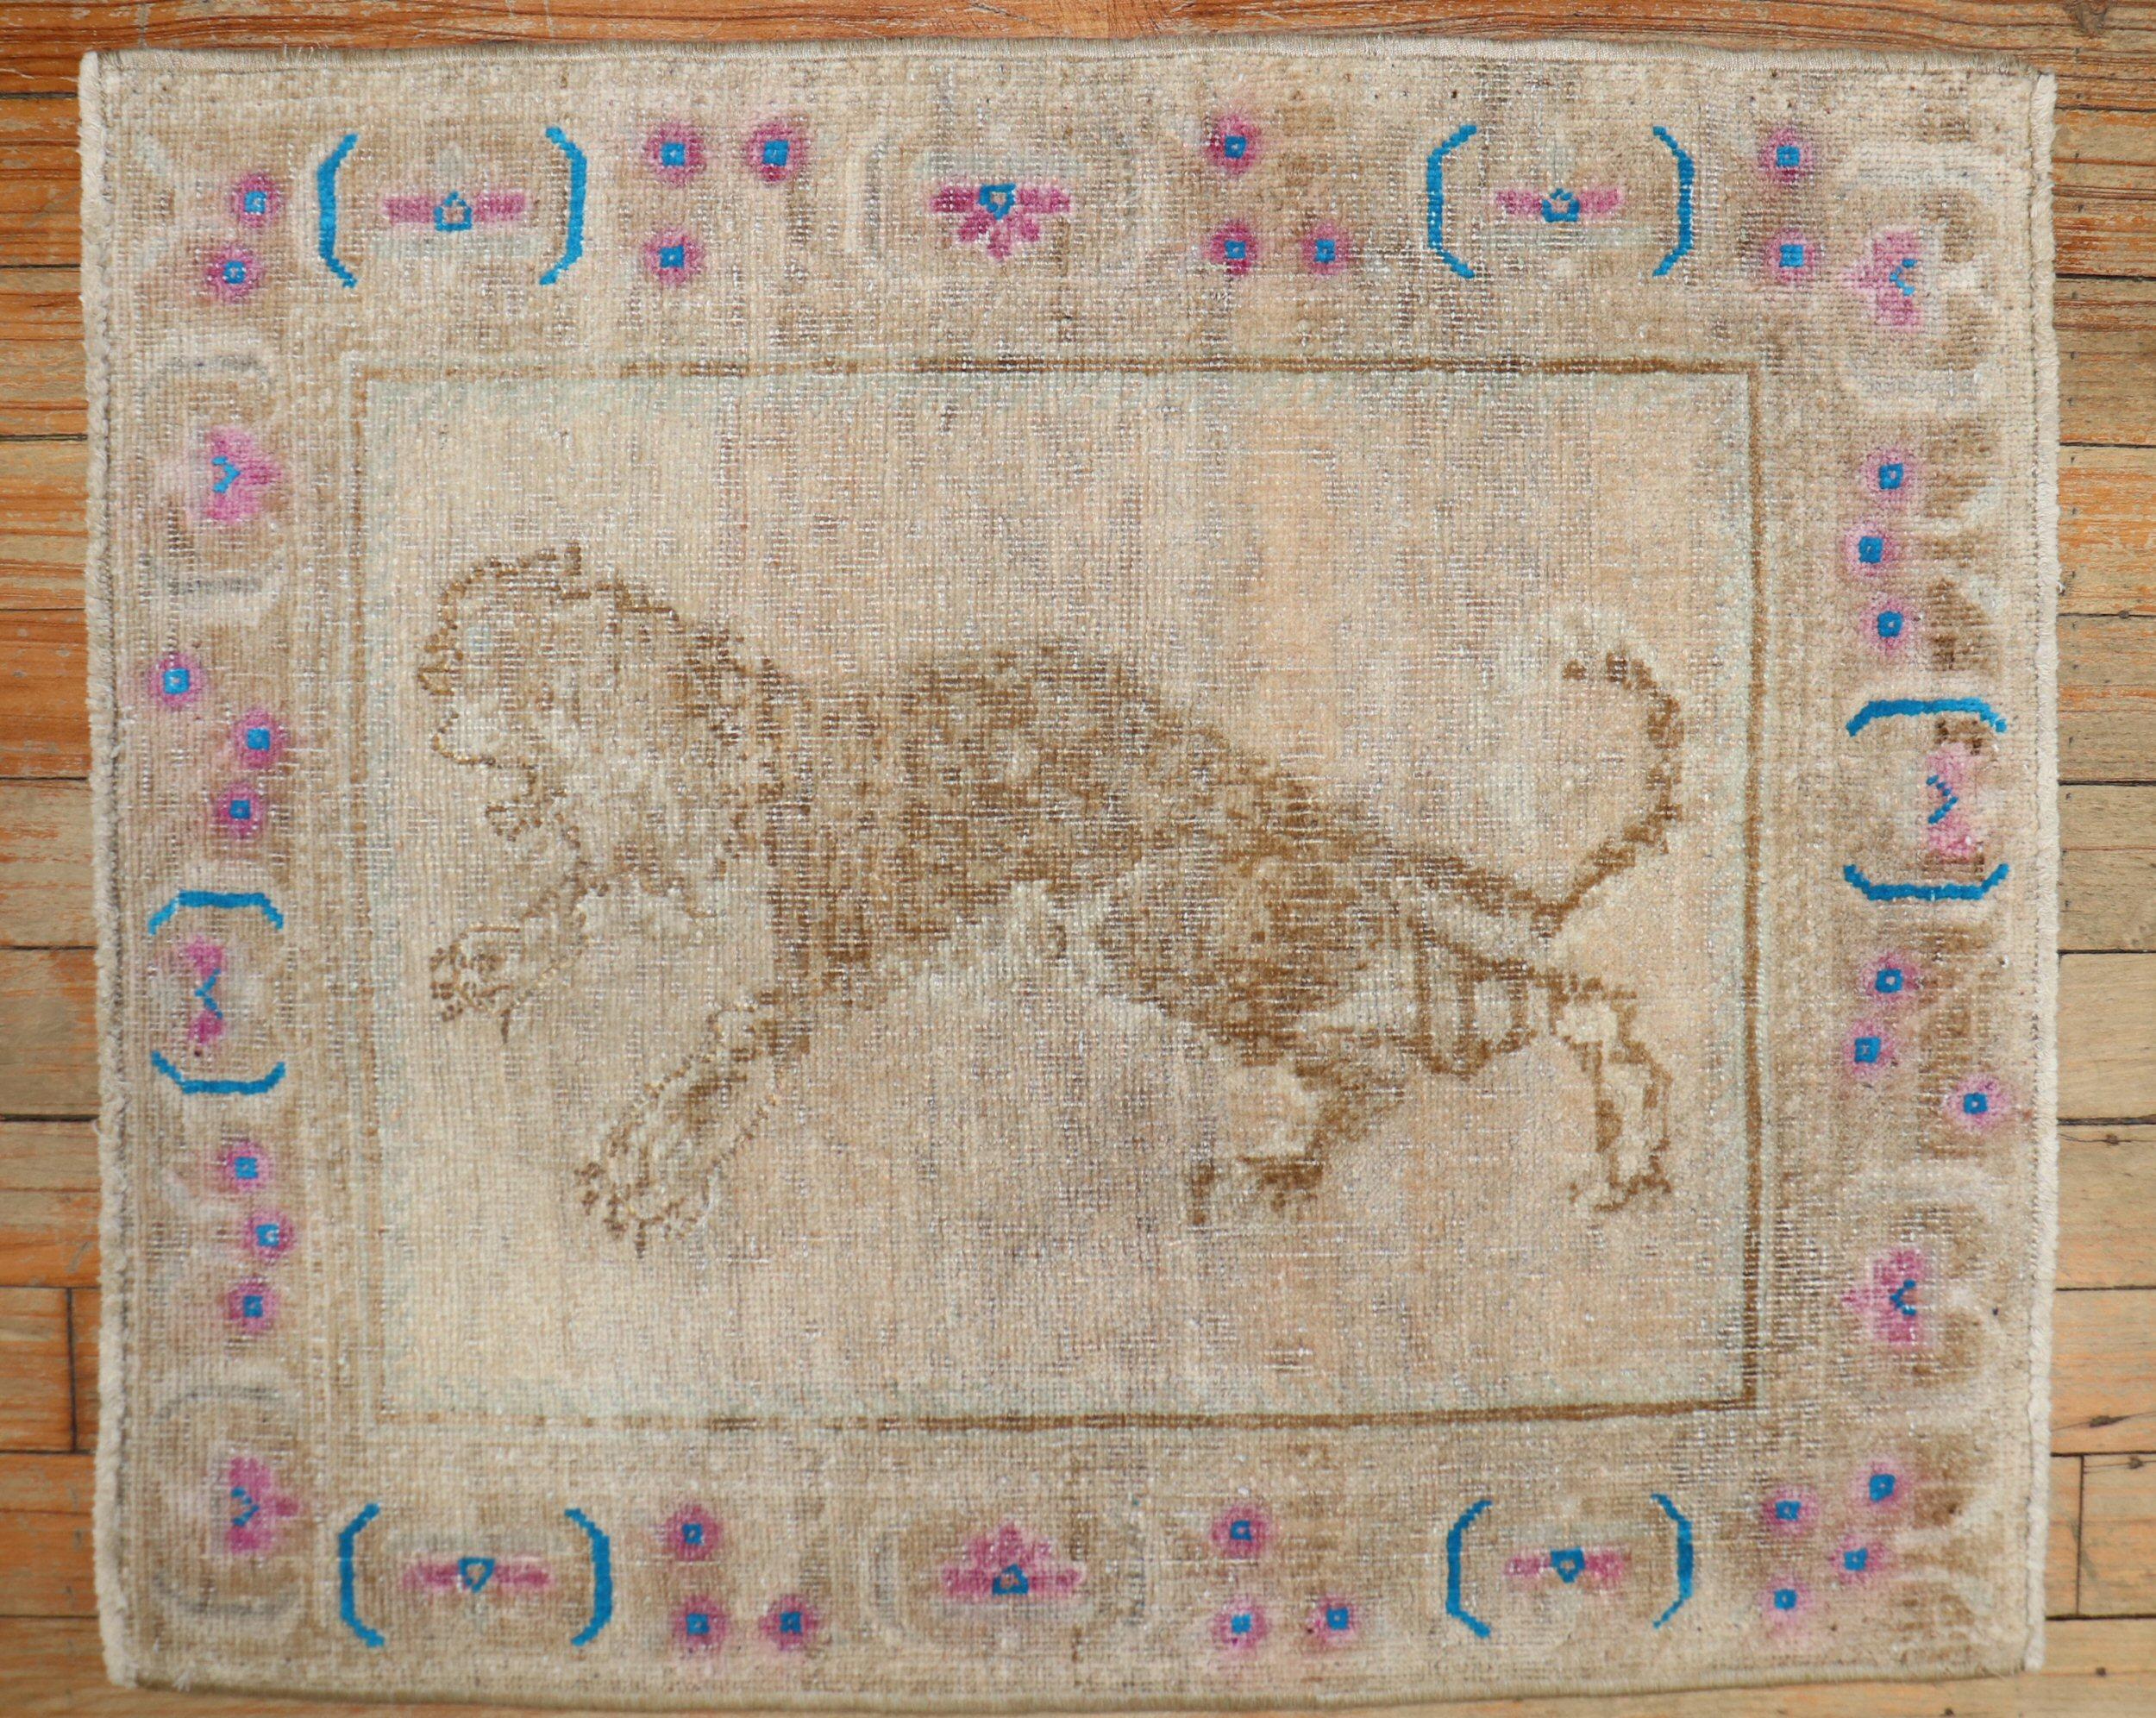 Mid-20th Century Persian Pictorial rug depicting a jaguar on a neutral field with colorful blue and pink accents on a narrow border.

Measures: 1'10'' x 2'3'' circa 1940.